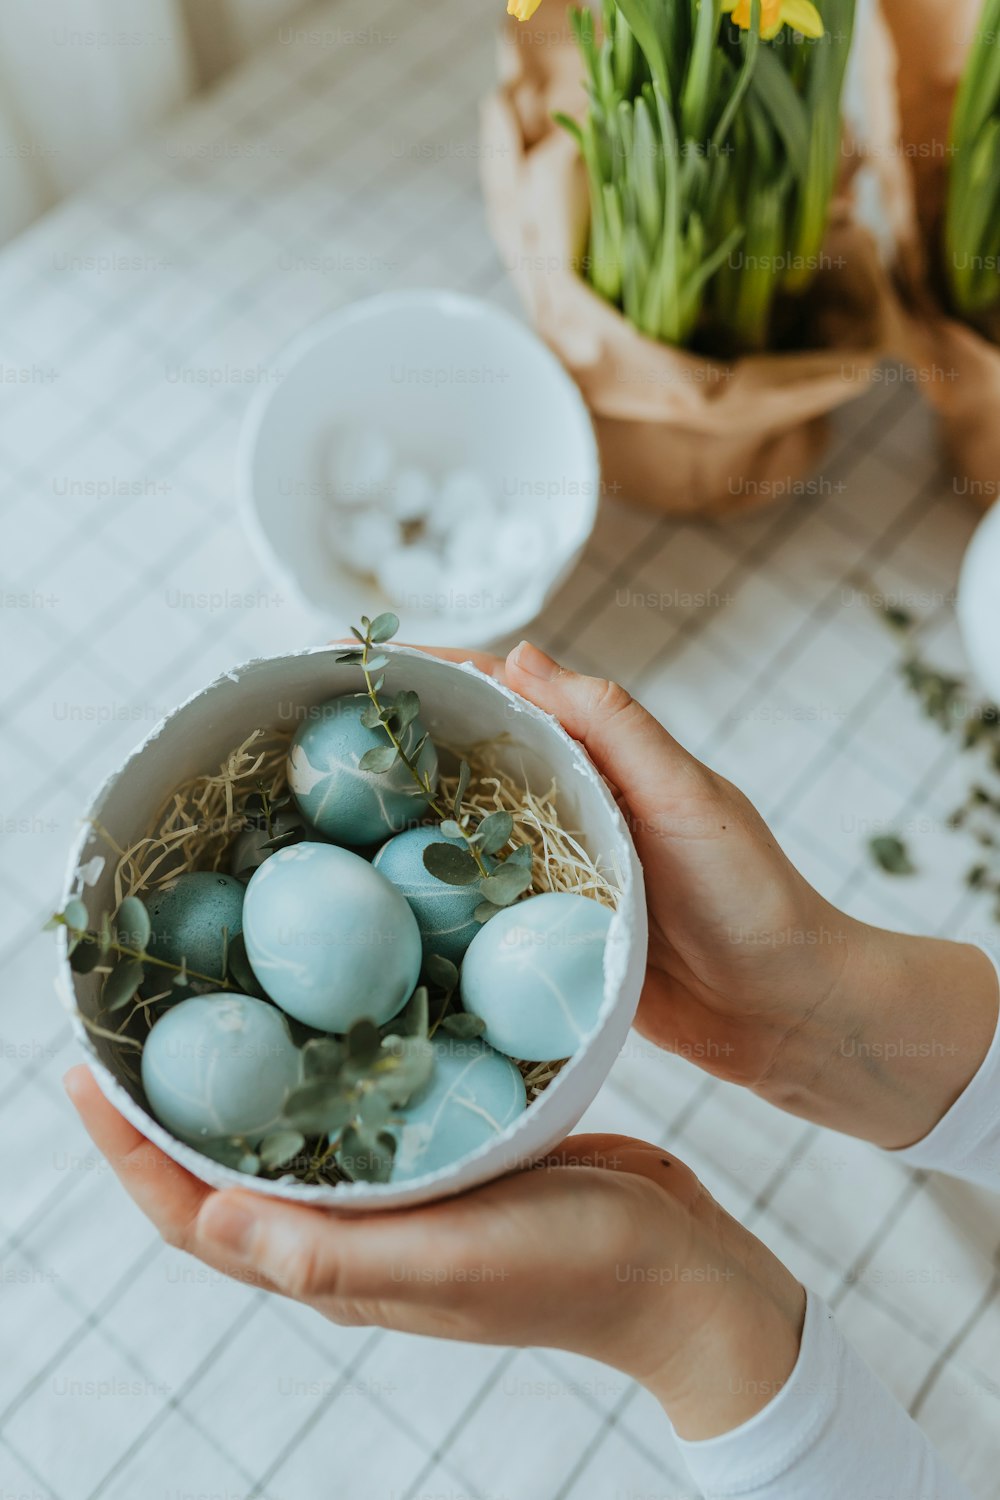 a person holding a bowl filled with blue eggs